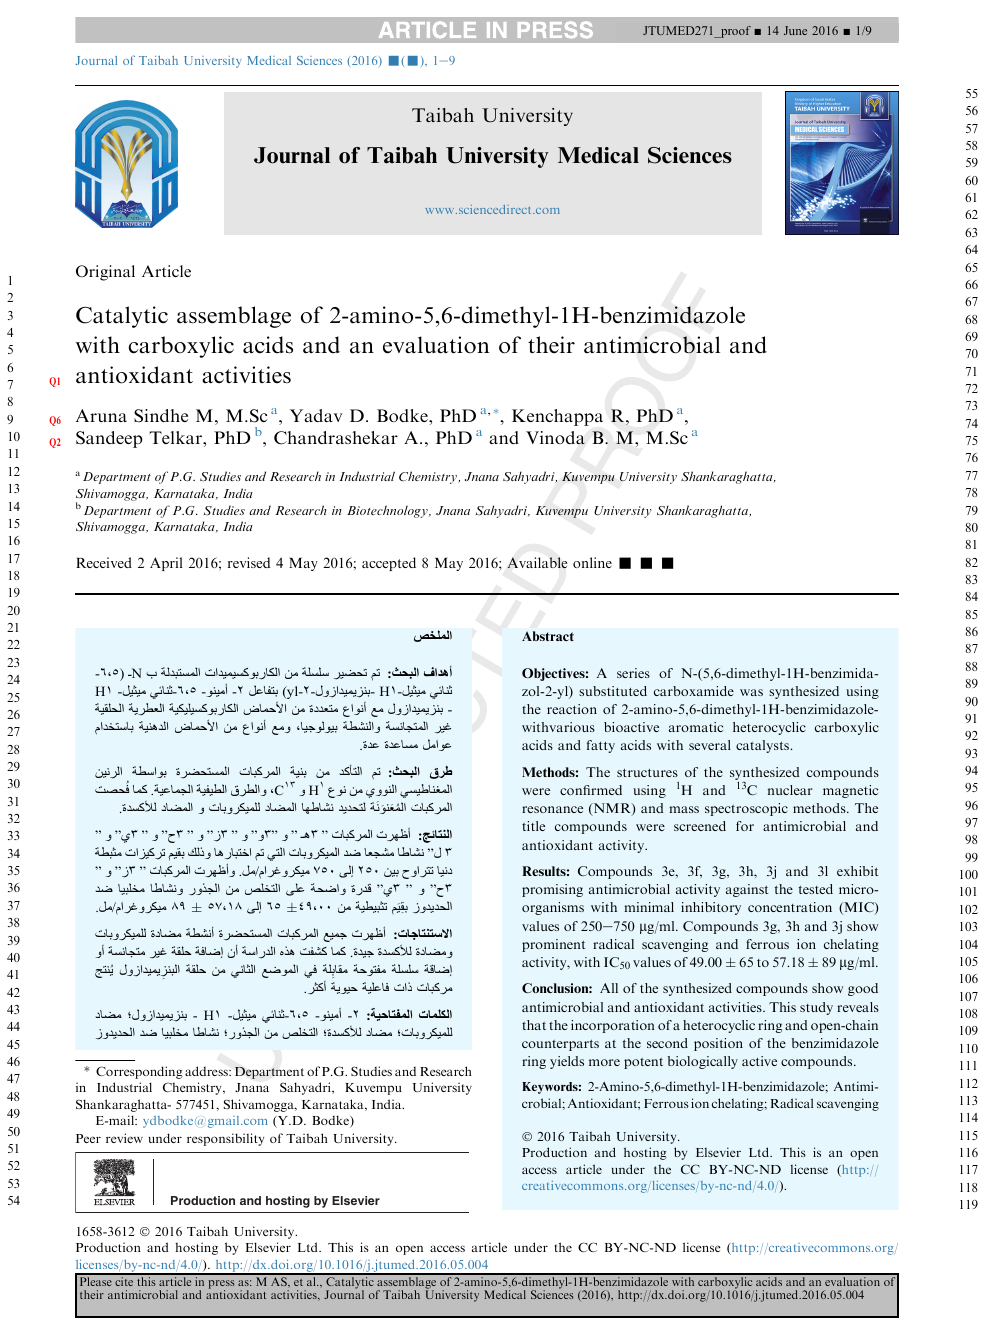 Catalytic Assemble Of 2 Amino 5 6 Dimethyl 1h Benzimidazole With Carboxylic Acids And Evaluation Of Their Antimicrobial And Antioxidant Activities Topic Of Research Paper In Chemical Sciences Download Scholarly Article Pdf And Read For Free On